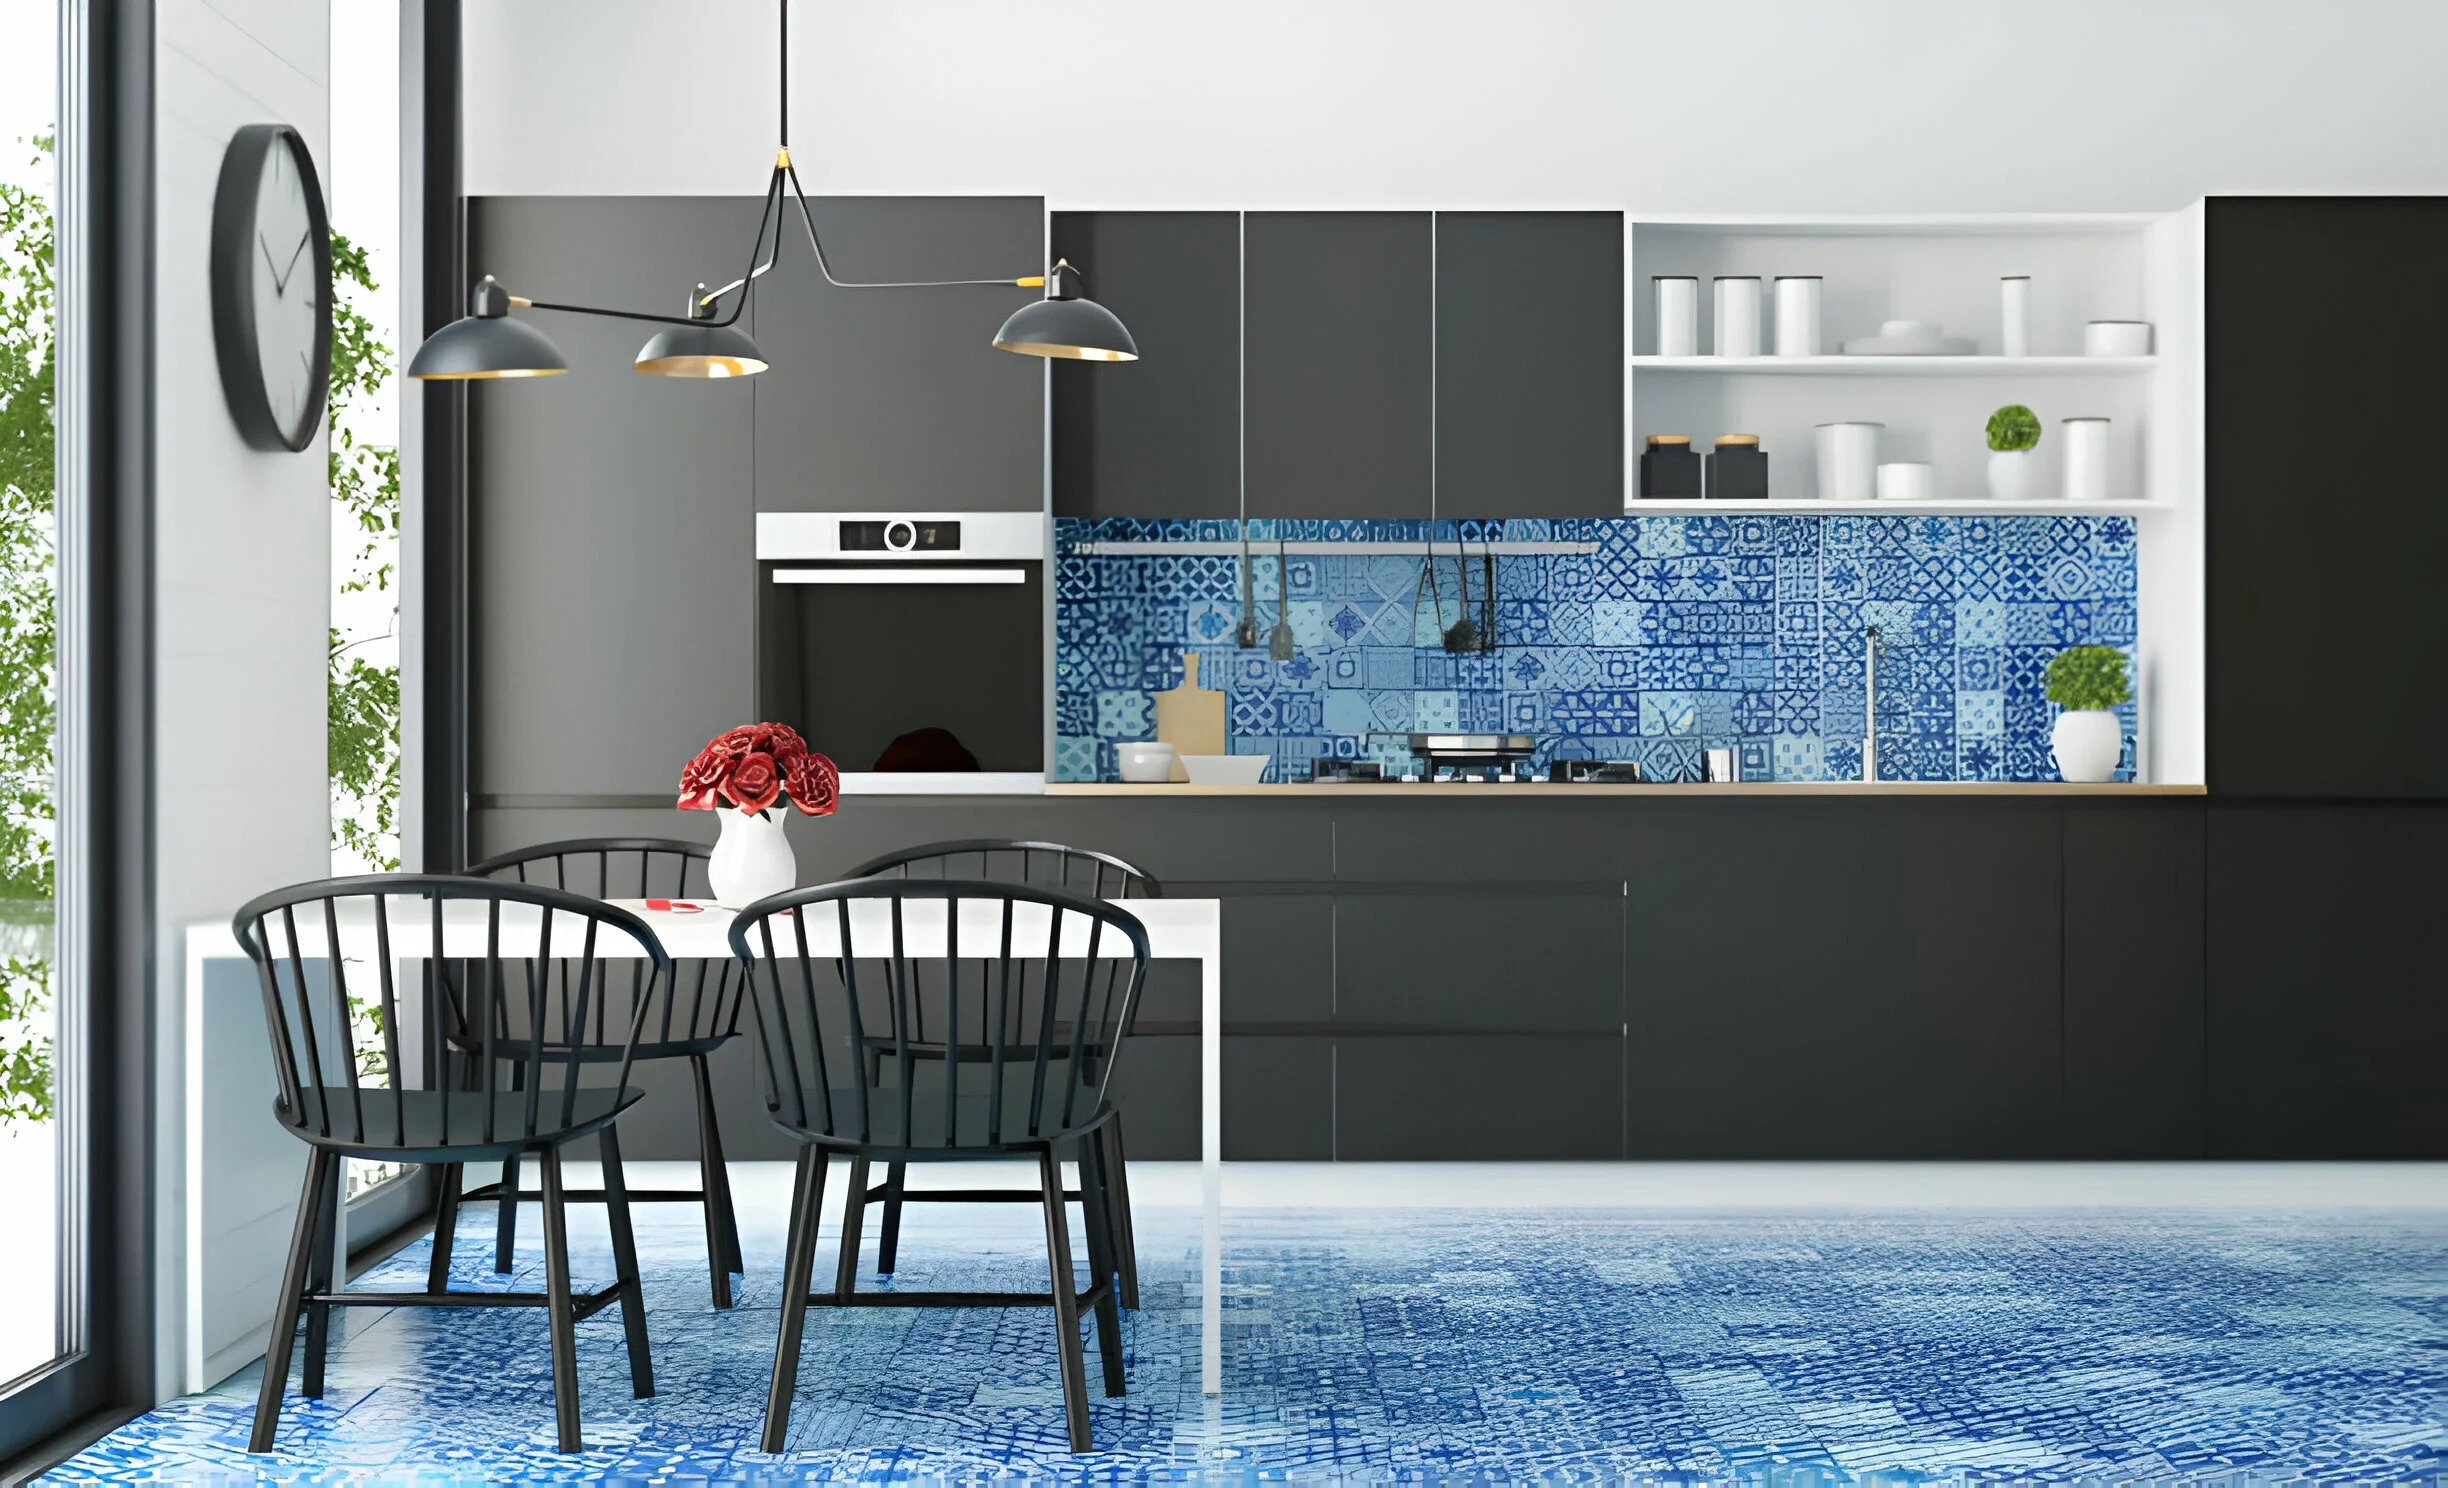 What is the best material for kitchen tiles